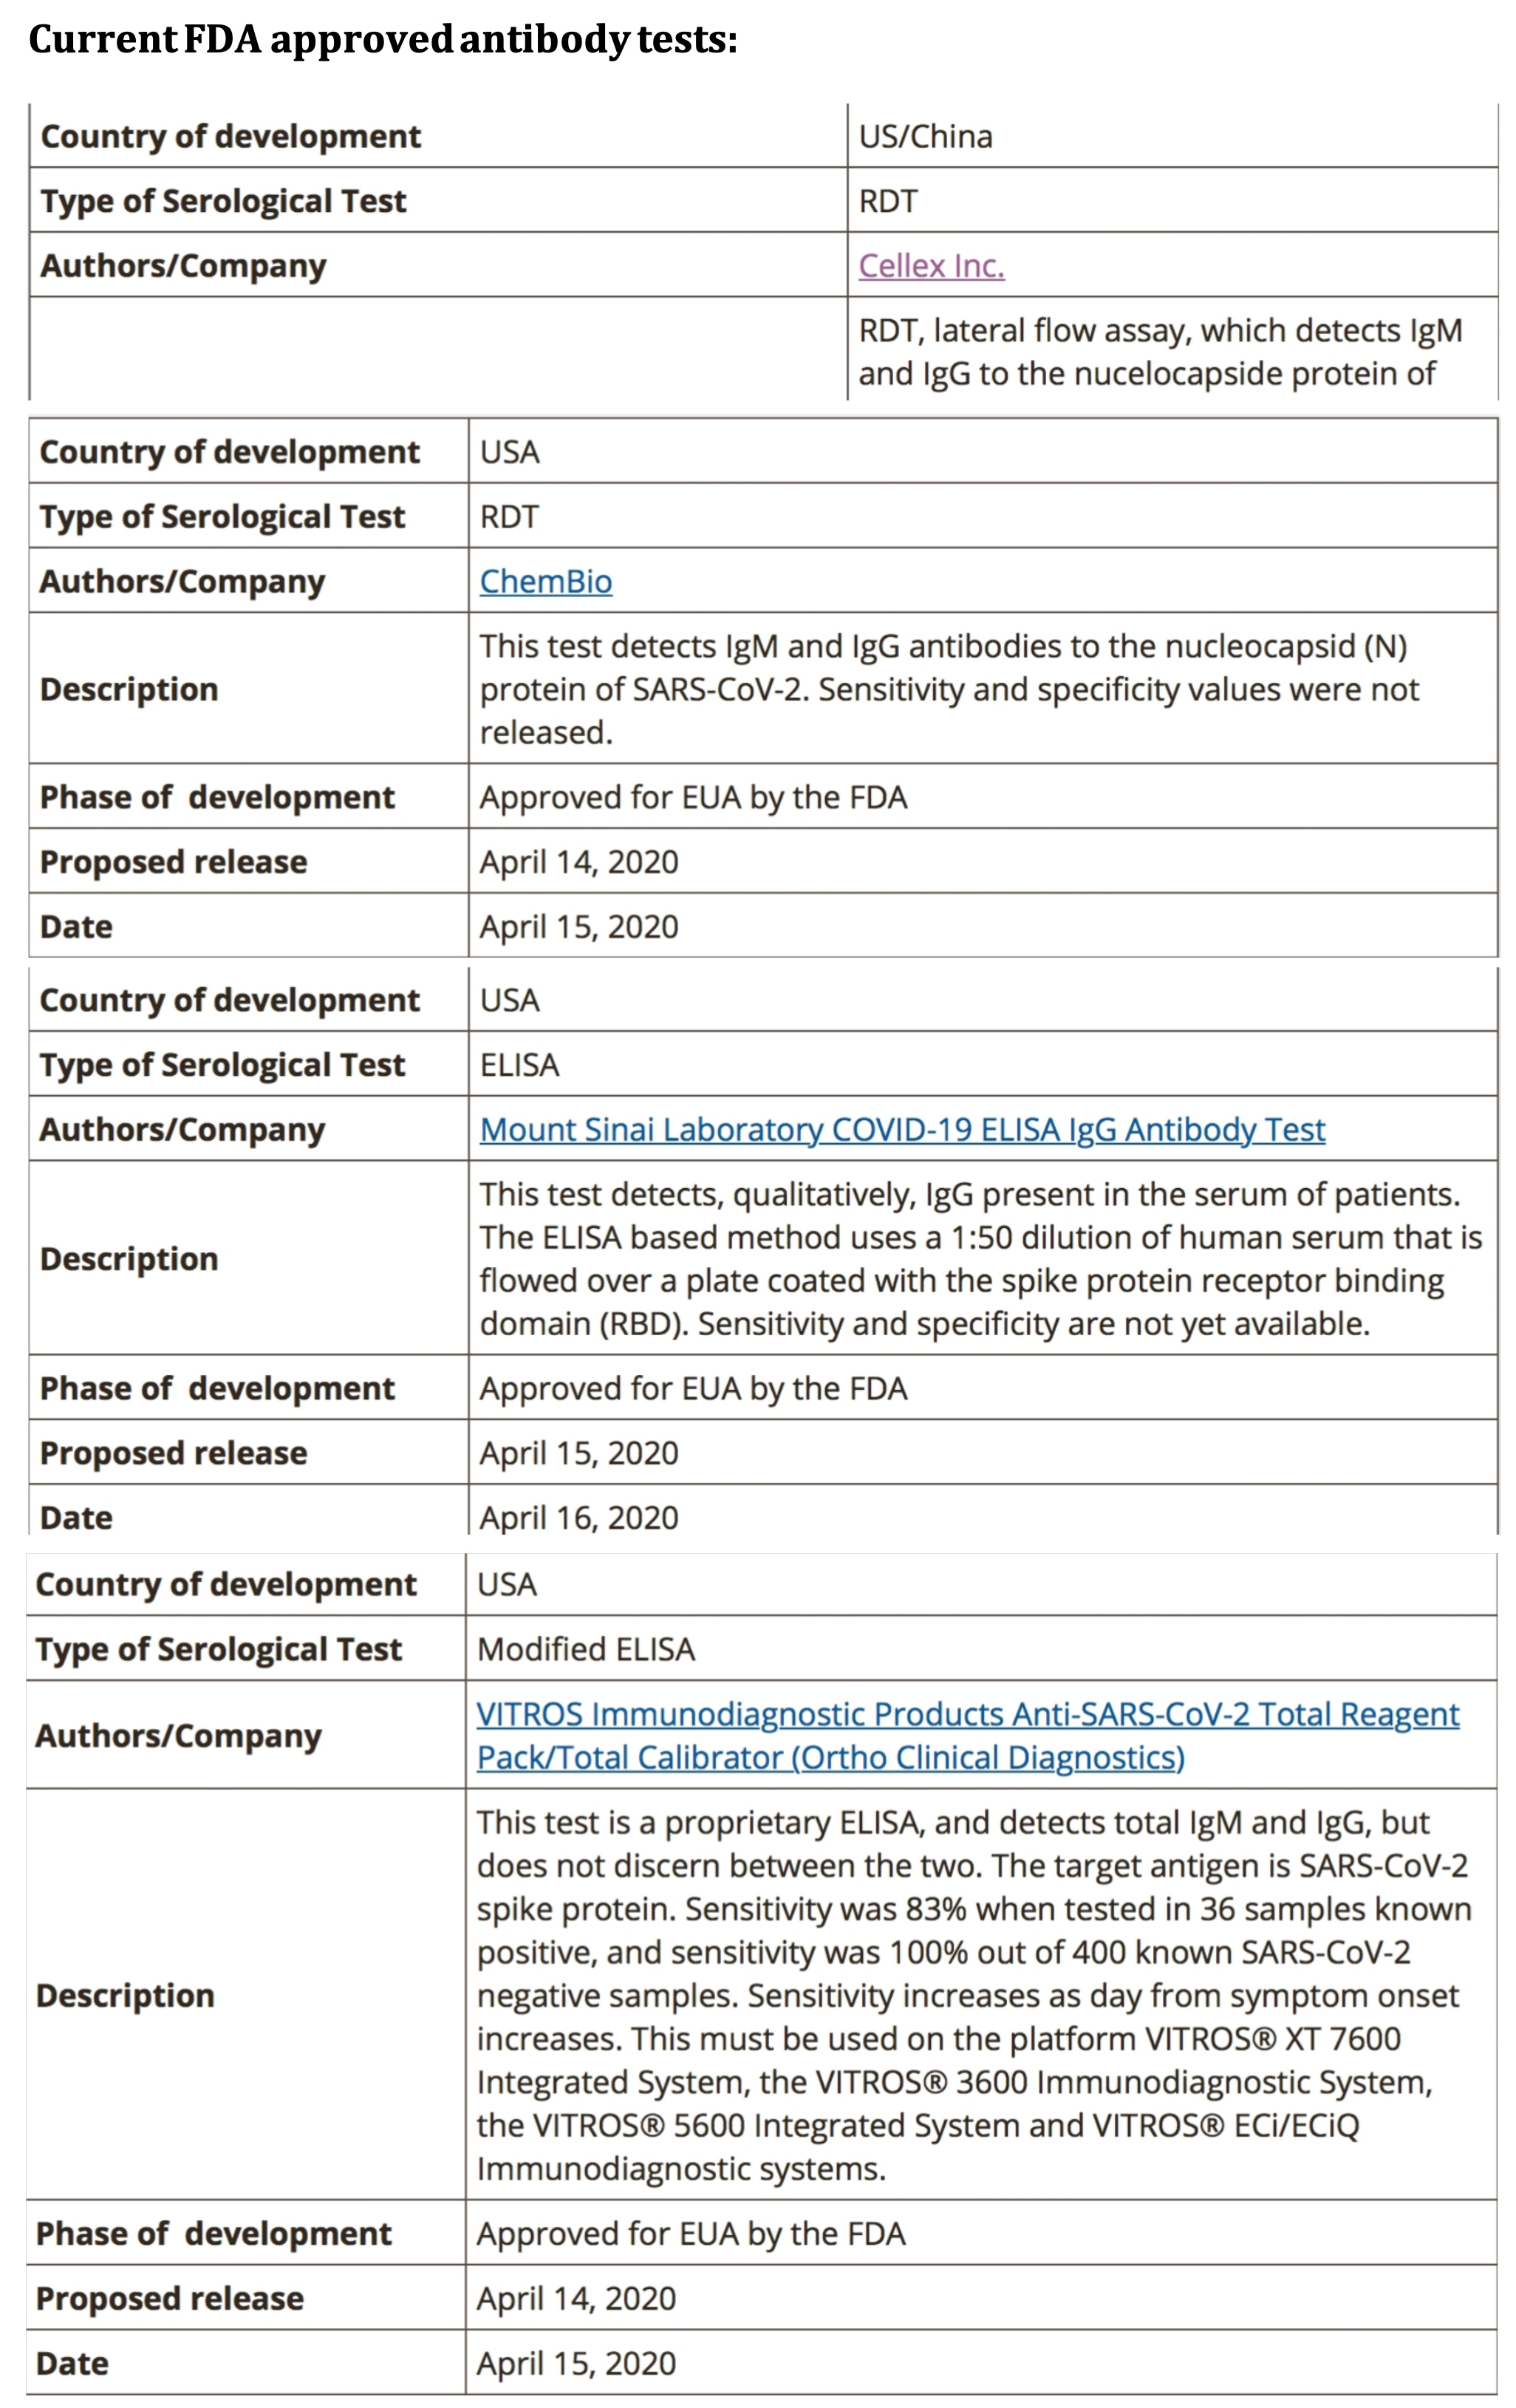 Current FDA-approved antibody tests